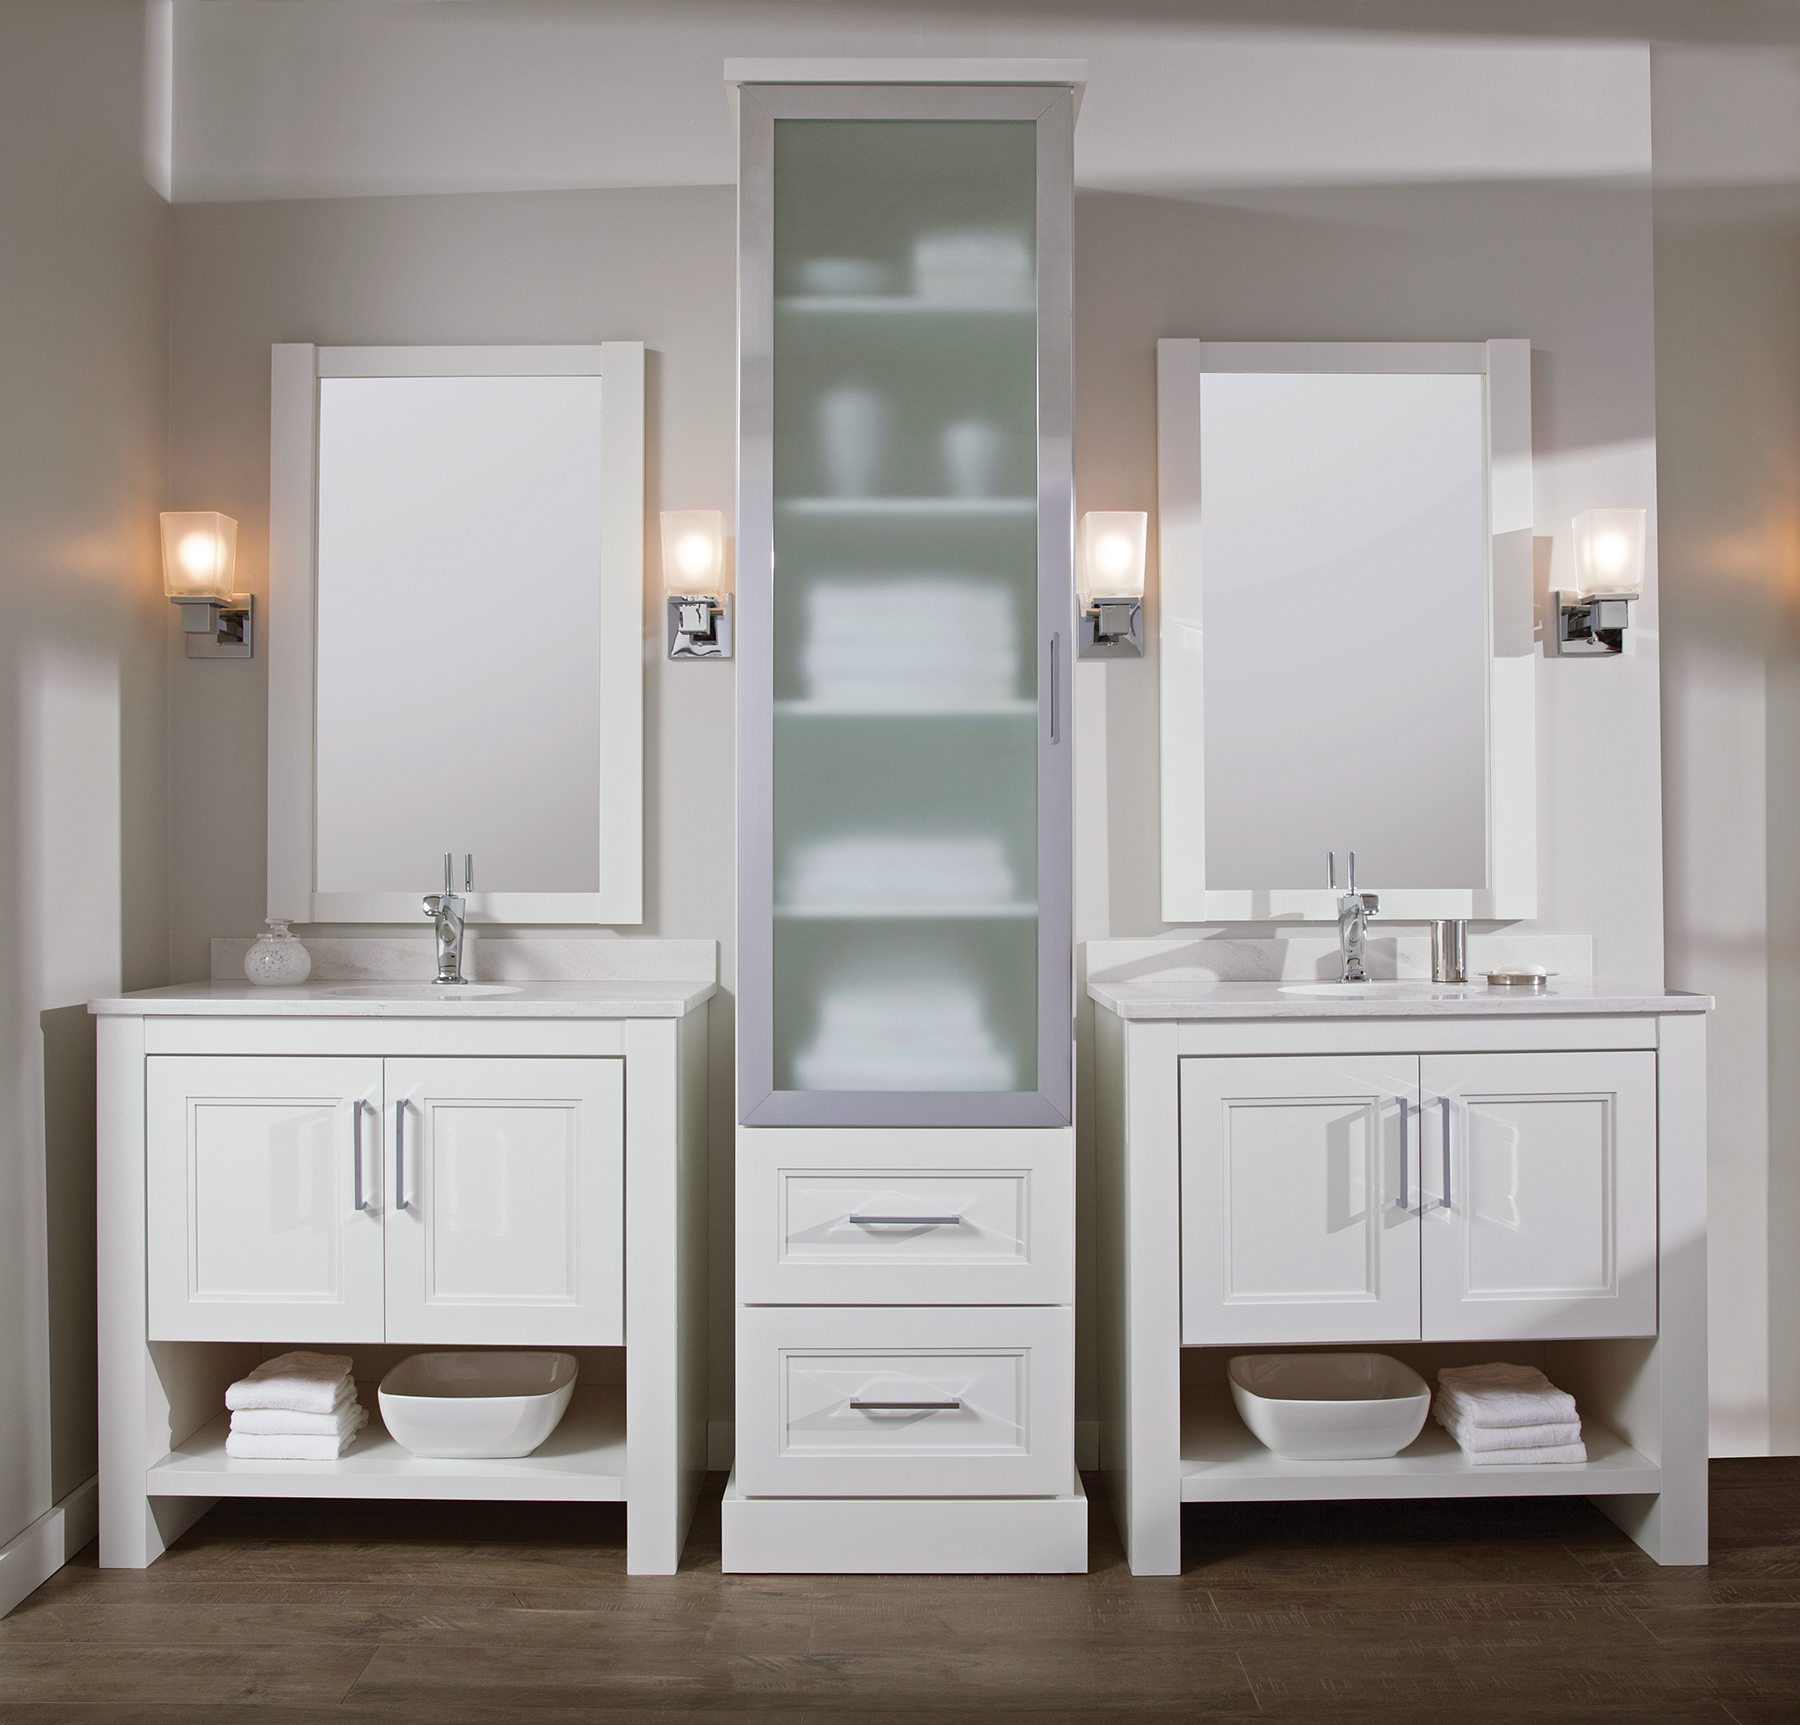 Dual vanities and a free standing linen cabinet between them make a coordinating bathroom furniture set.